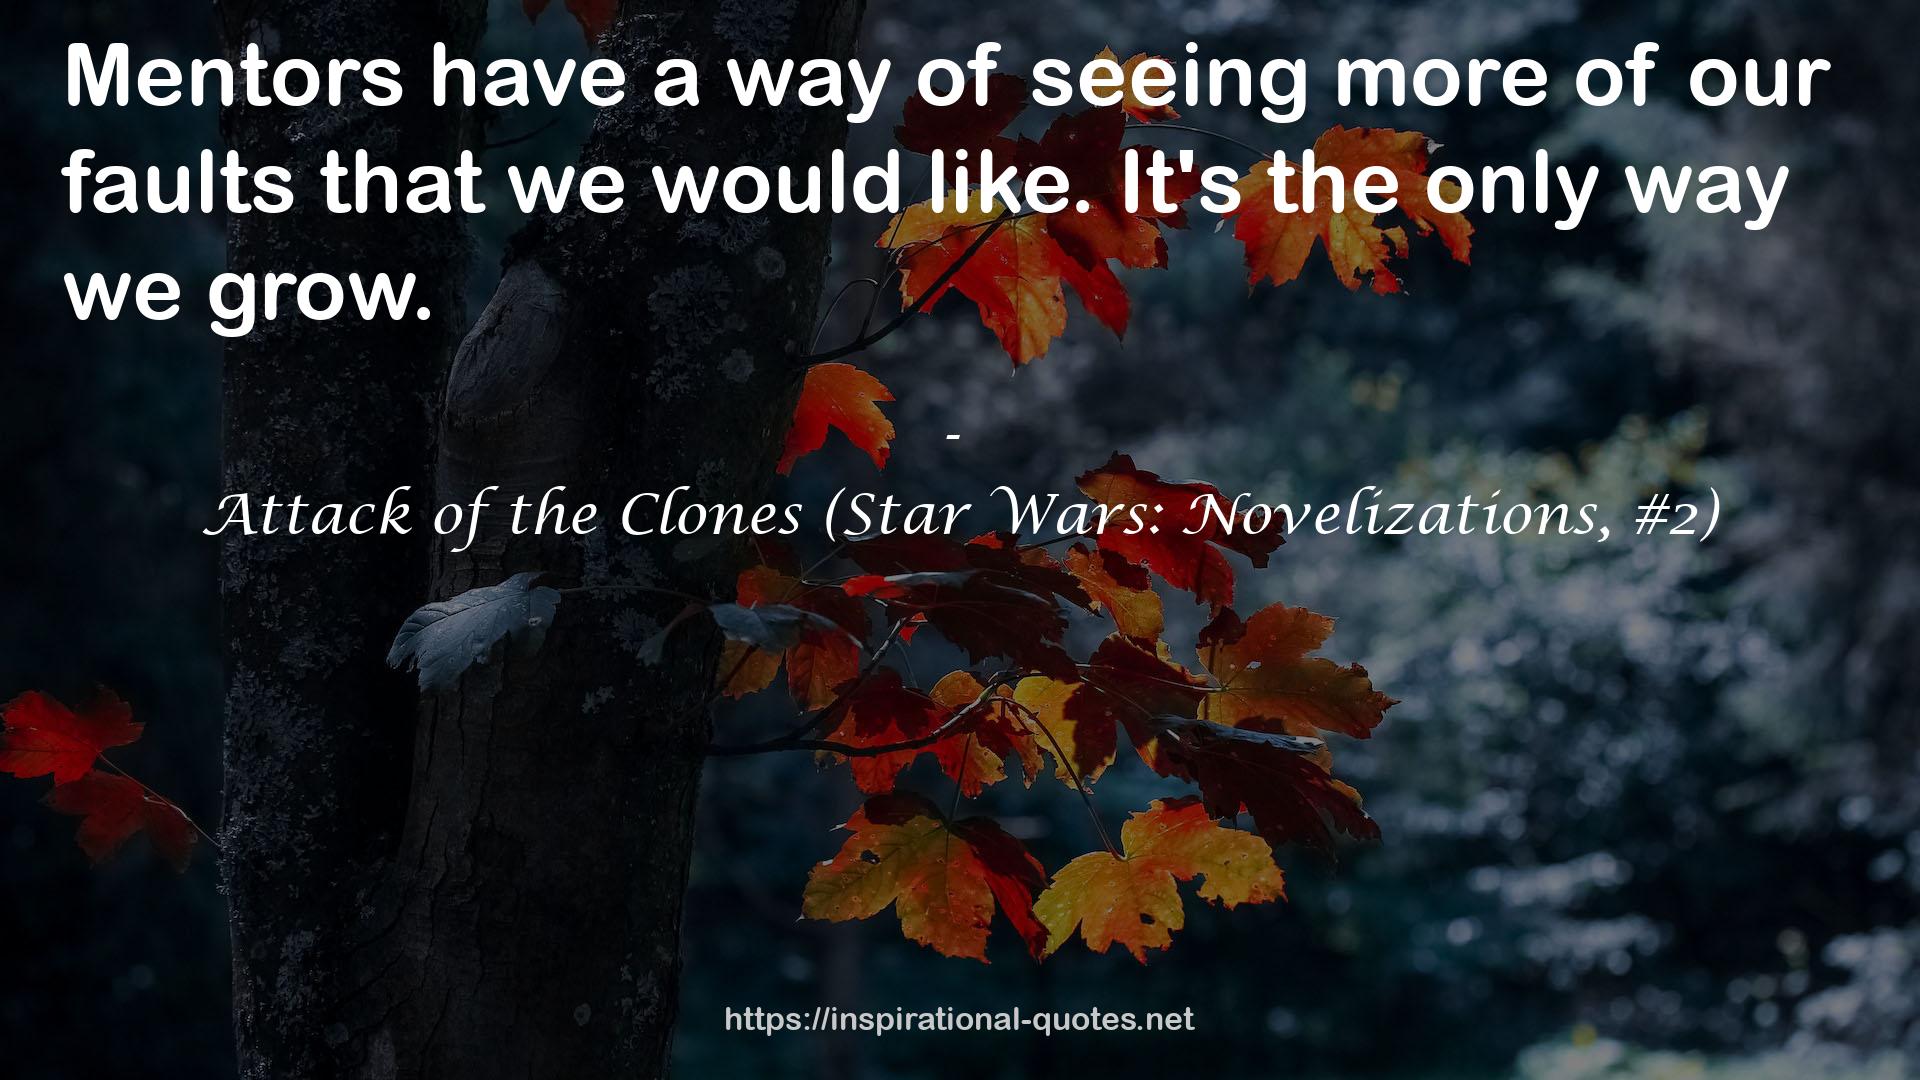 Attack of the Clones (Star Wars: Novelizations, #2) QUOTES